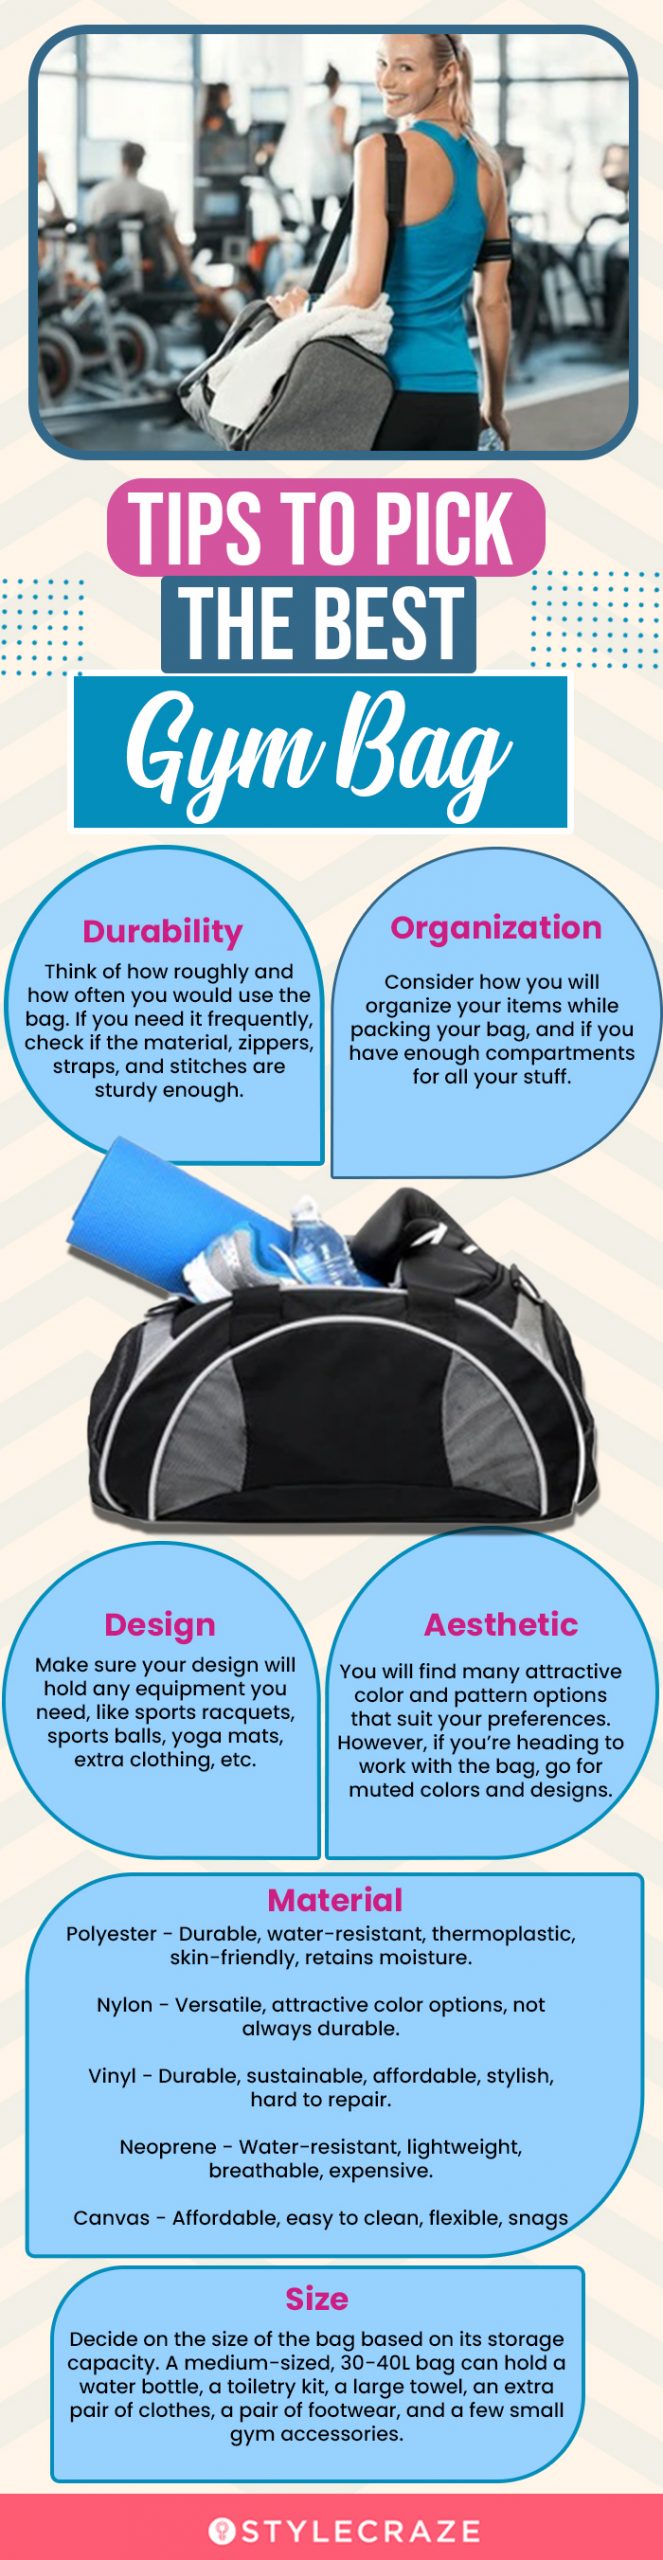 Tips To Pick The Best Gym Bag (infographic)